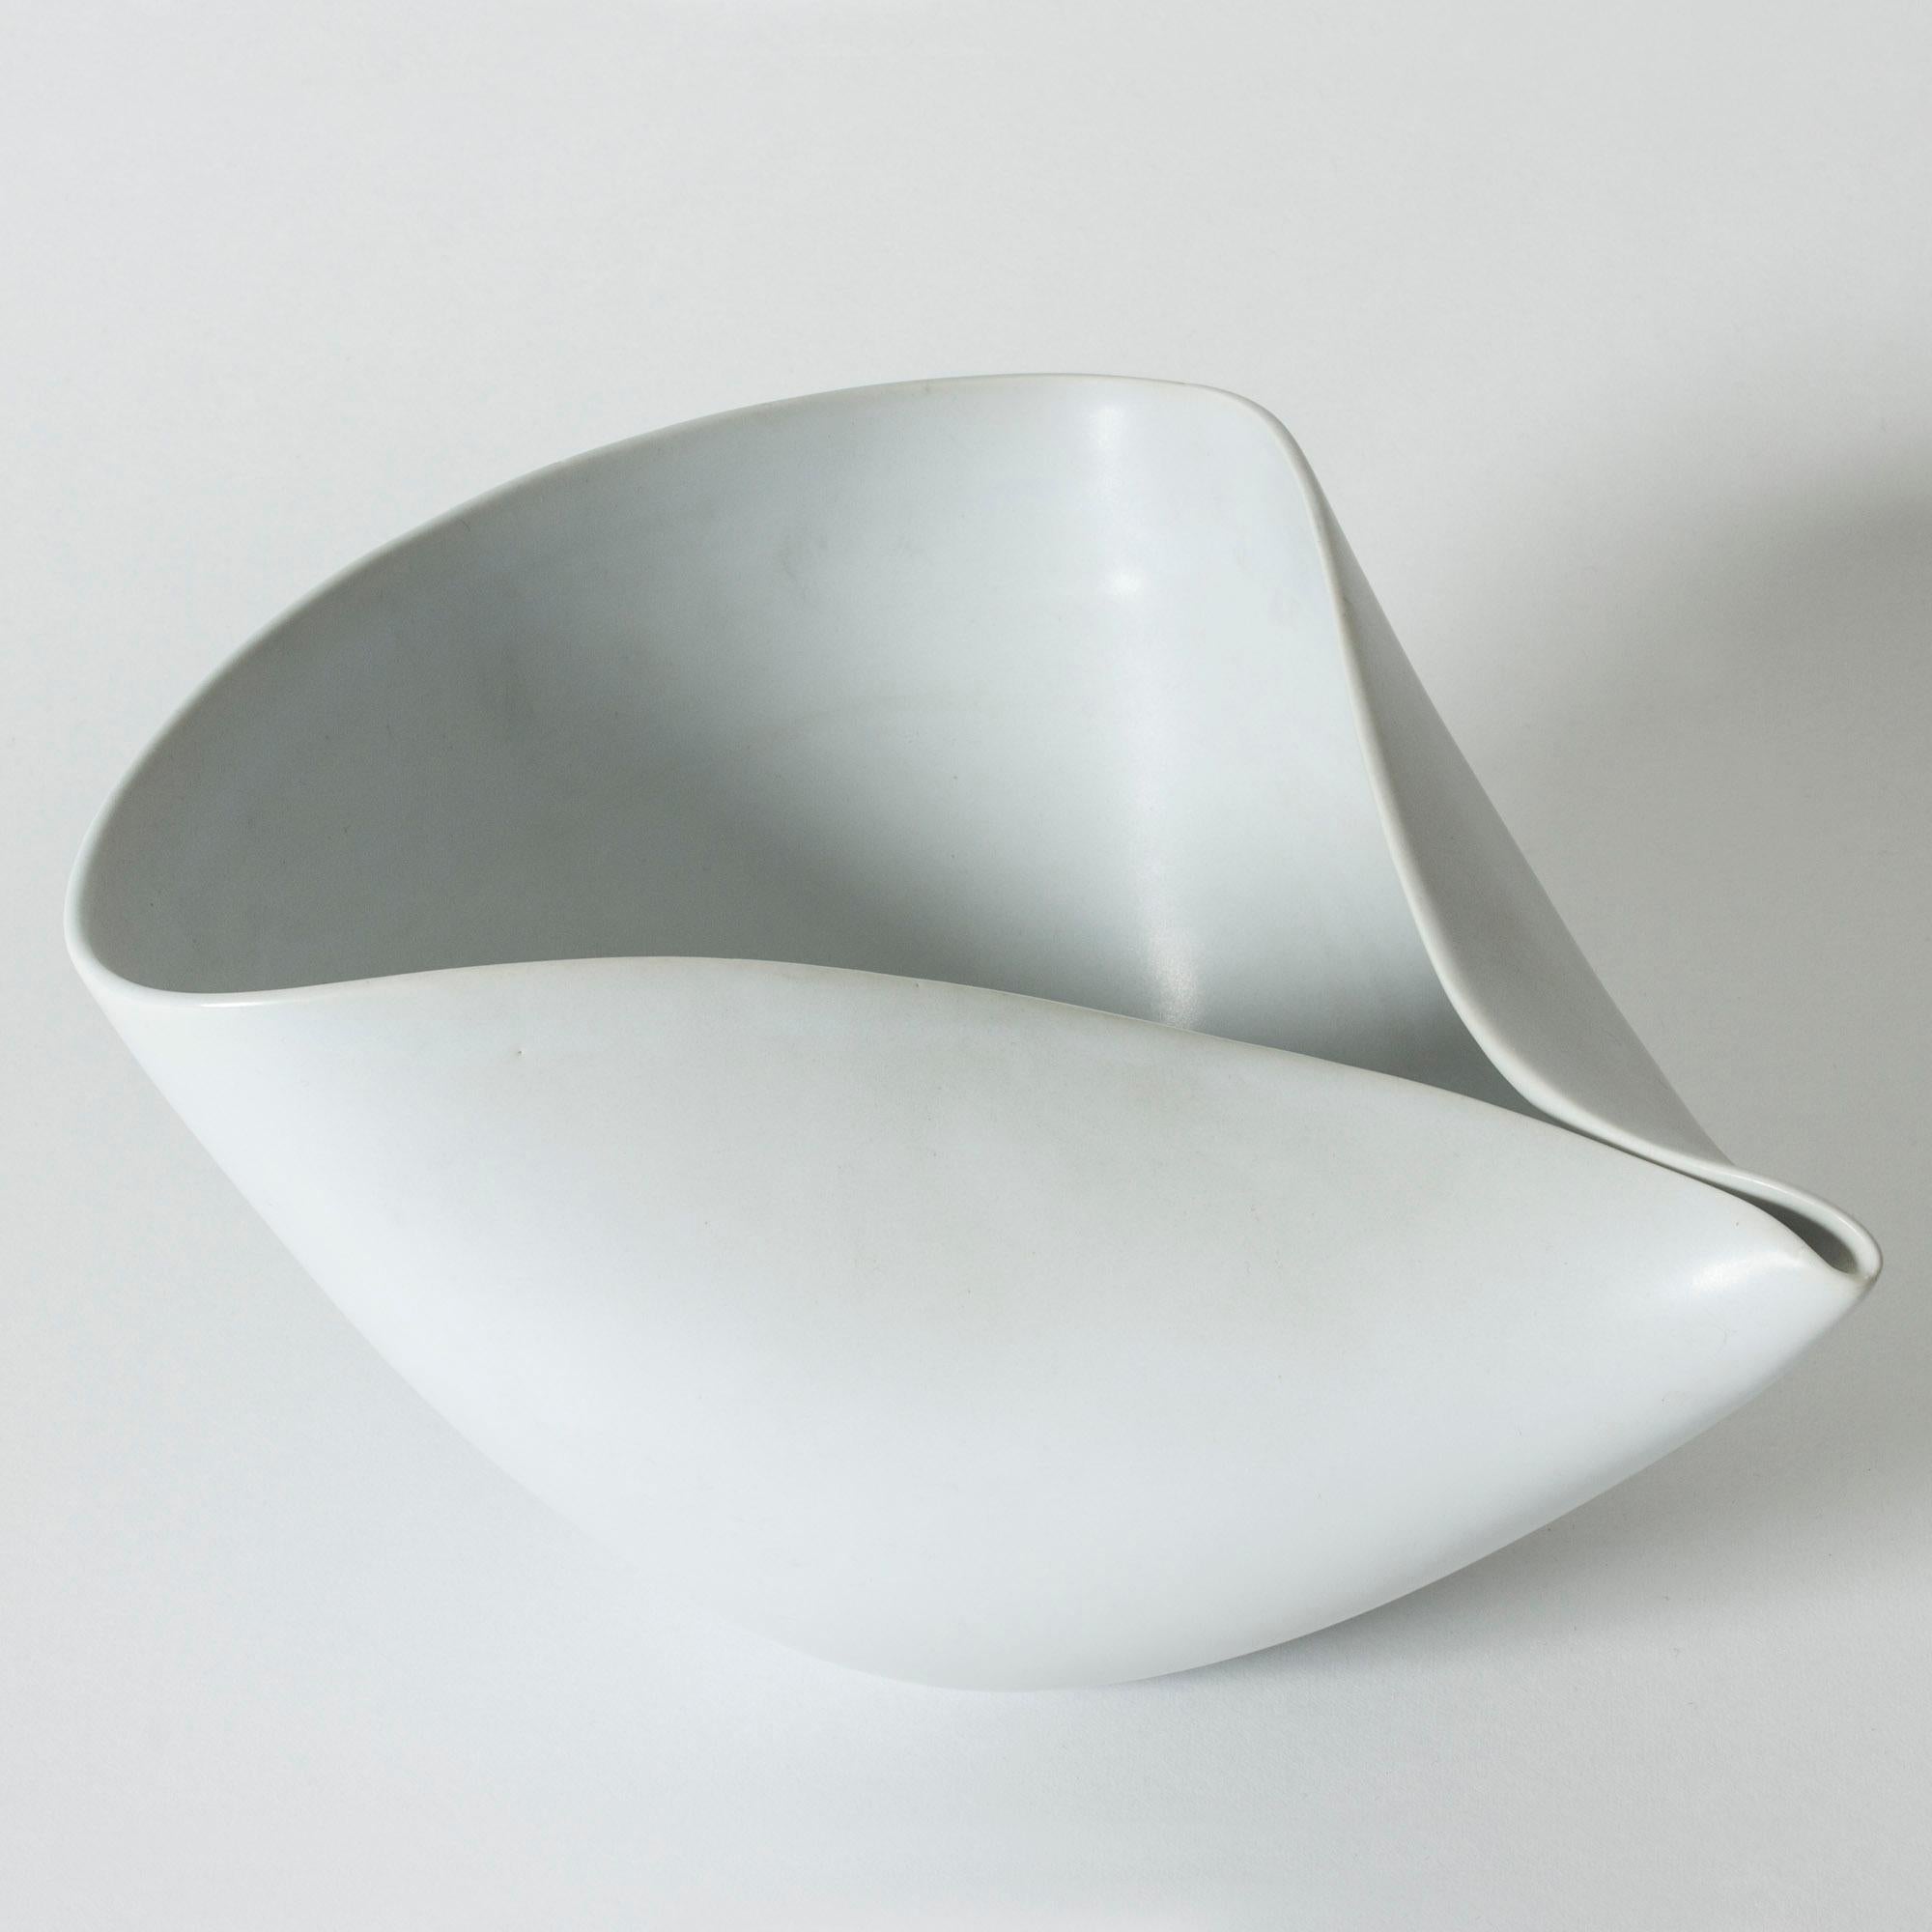 Striking, large “Veckla” bowl by Stig Lindberg. Rare model with the characteristic, smoothly folded design. Made in carrara stoneware.